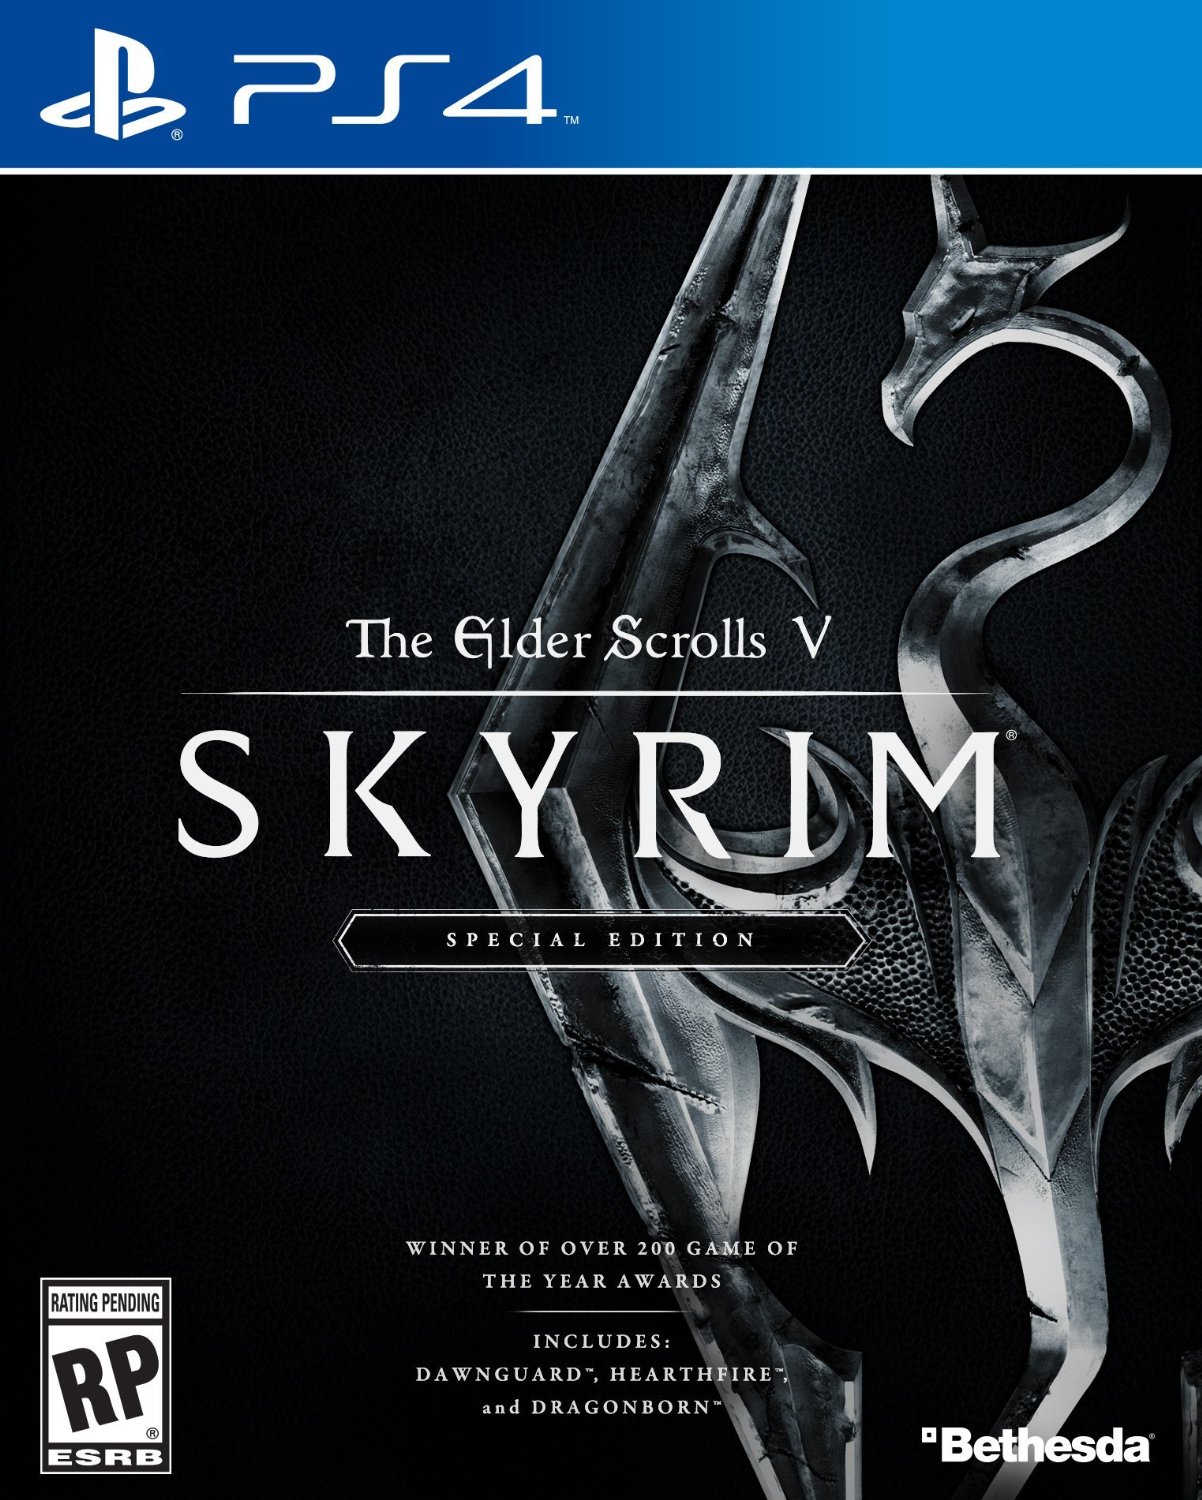 skyrim-remaster-releases-in-october-2016-wholesgame